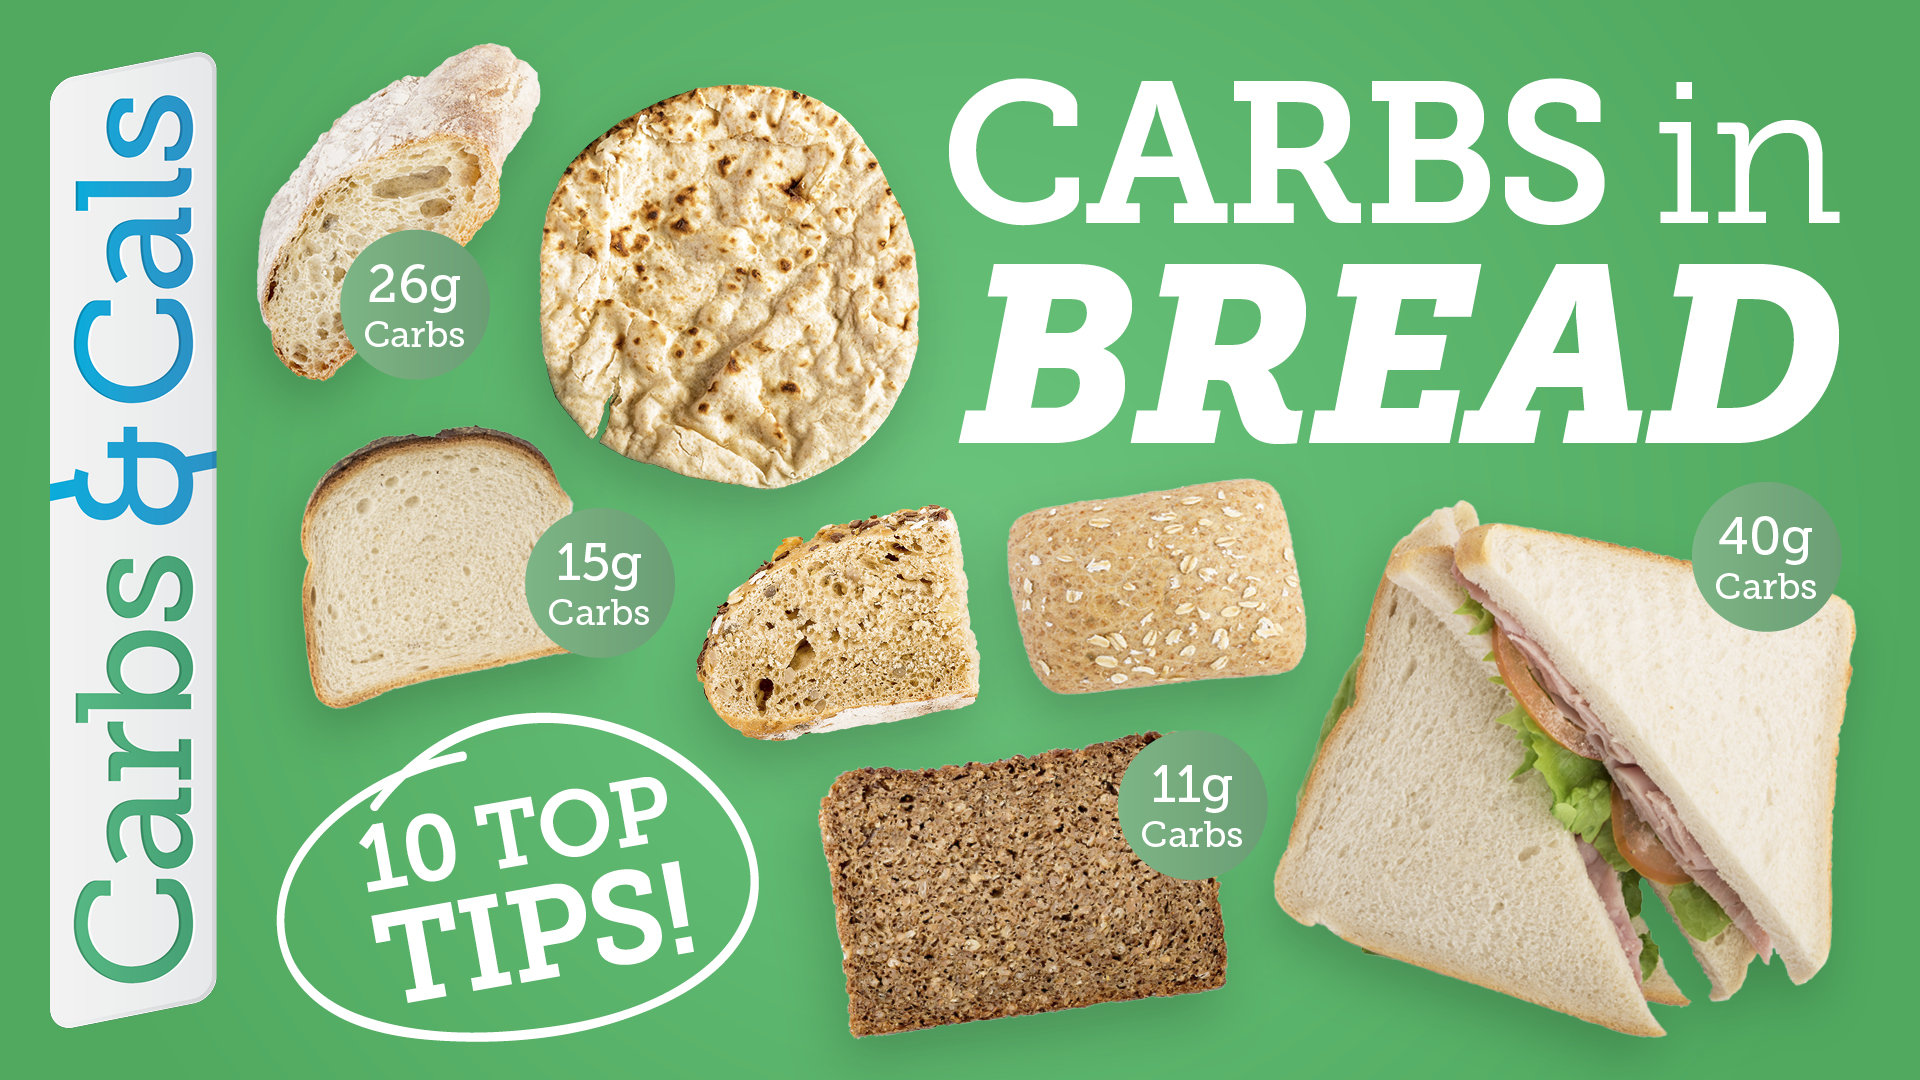 Video - Carbs in Bread with 10 Top Tips